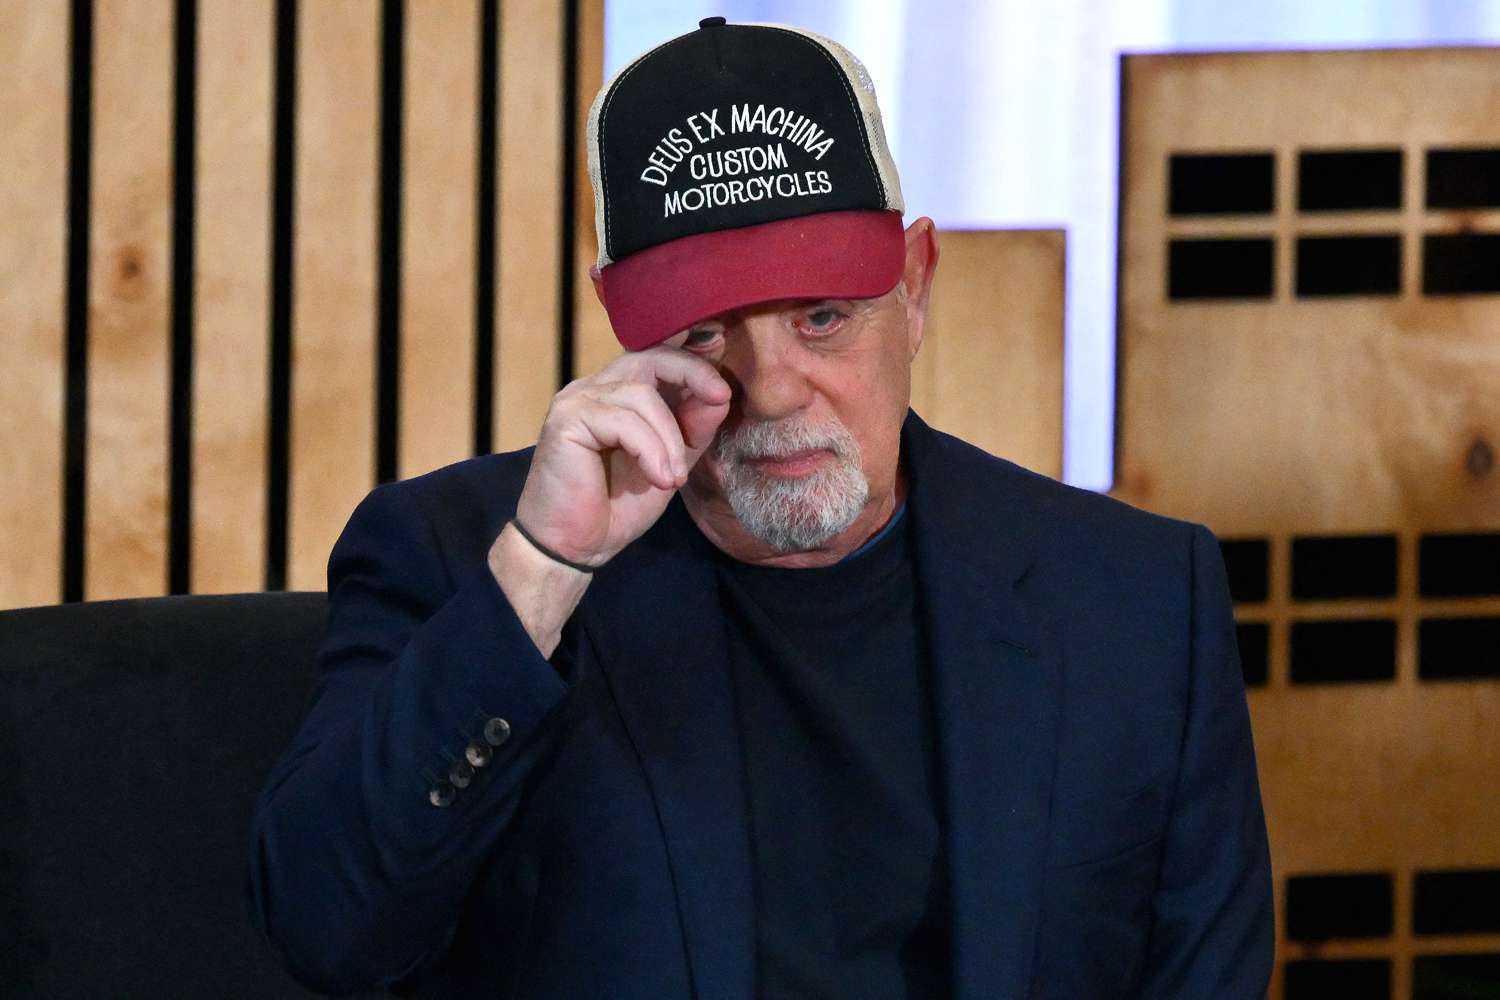 Singer Billy Joel announces the end of his residency at Madison Square Garden in 2024 during a press conference on June 1, 202